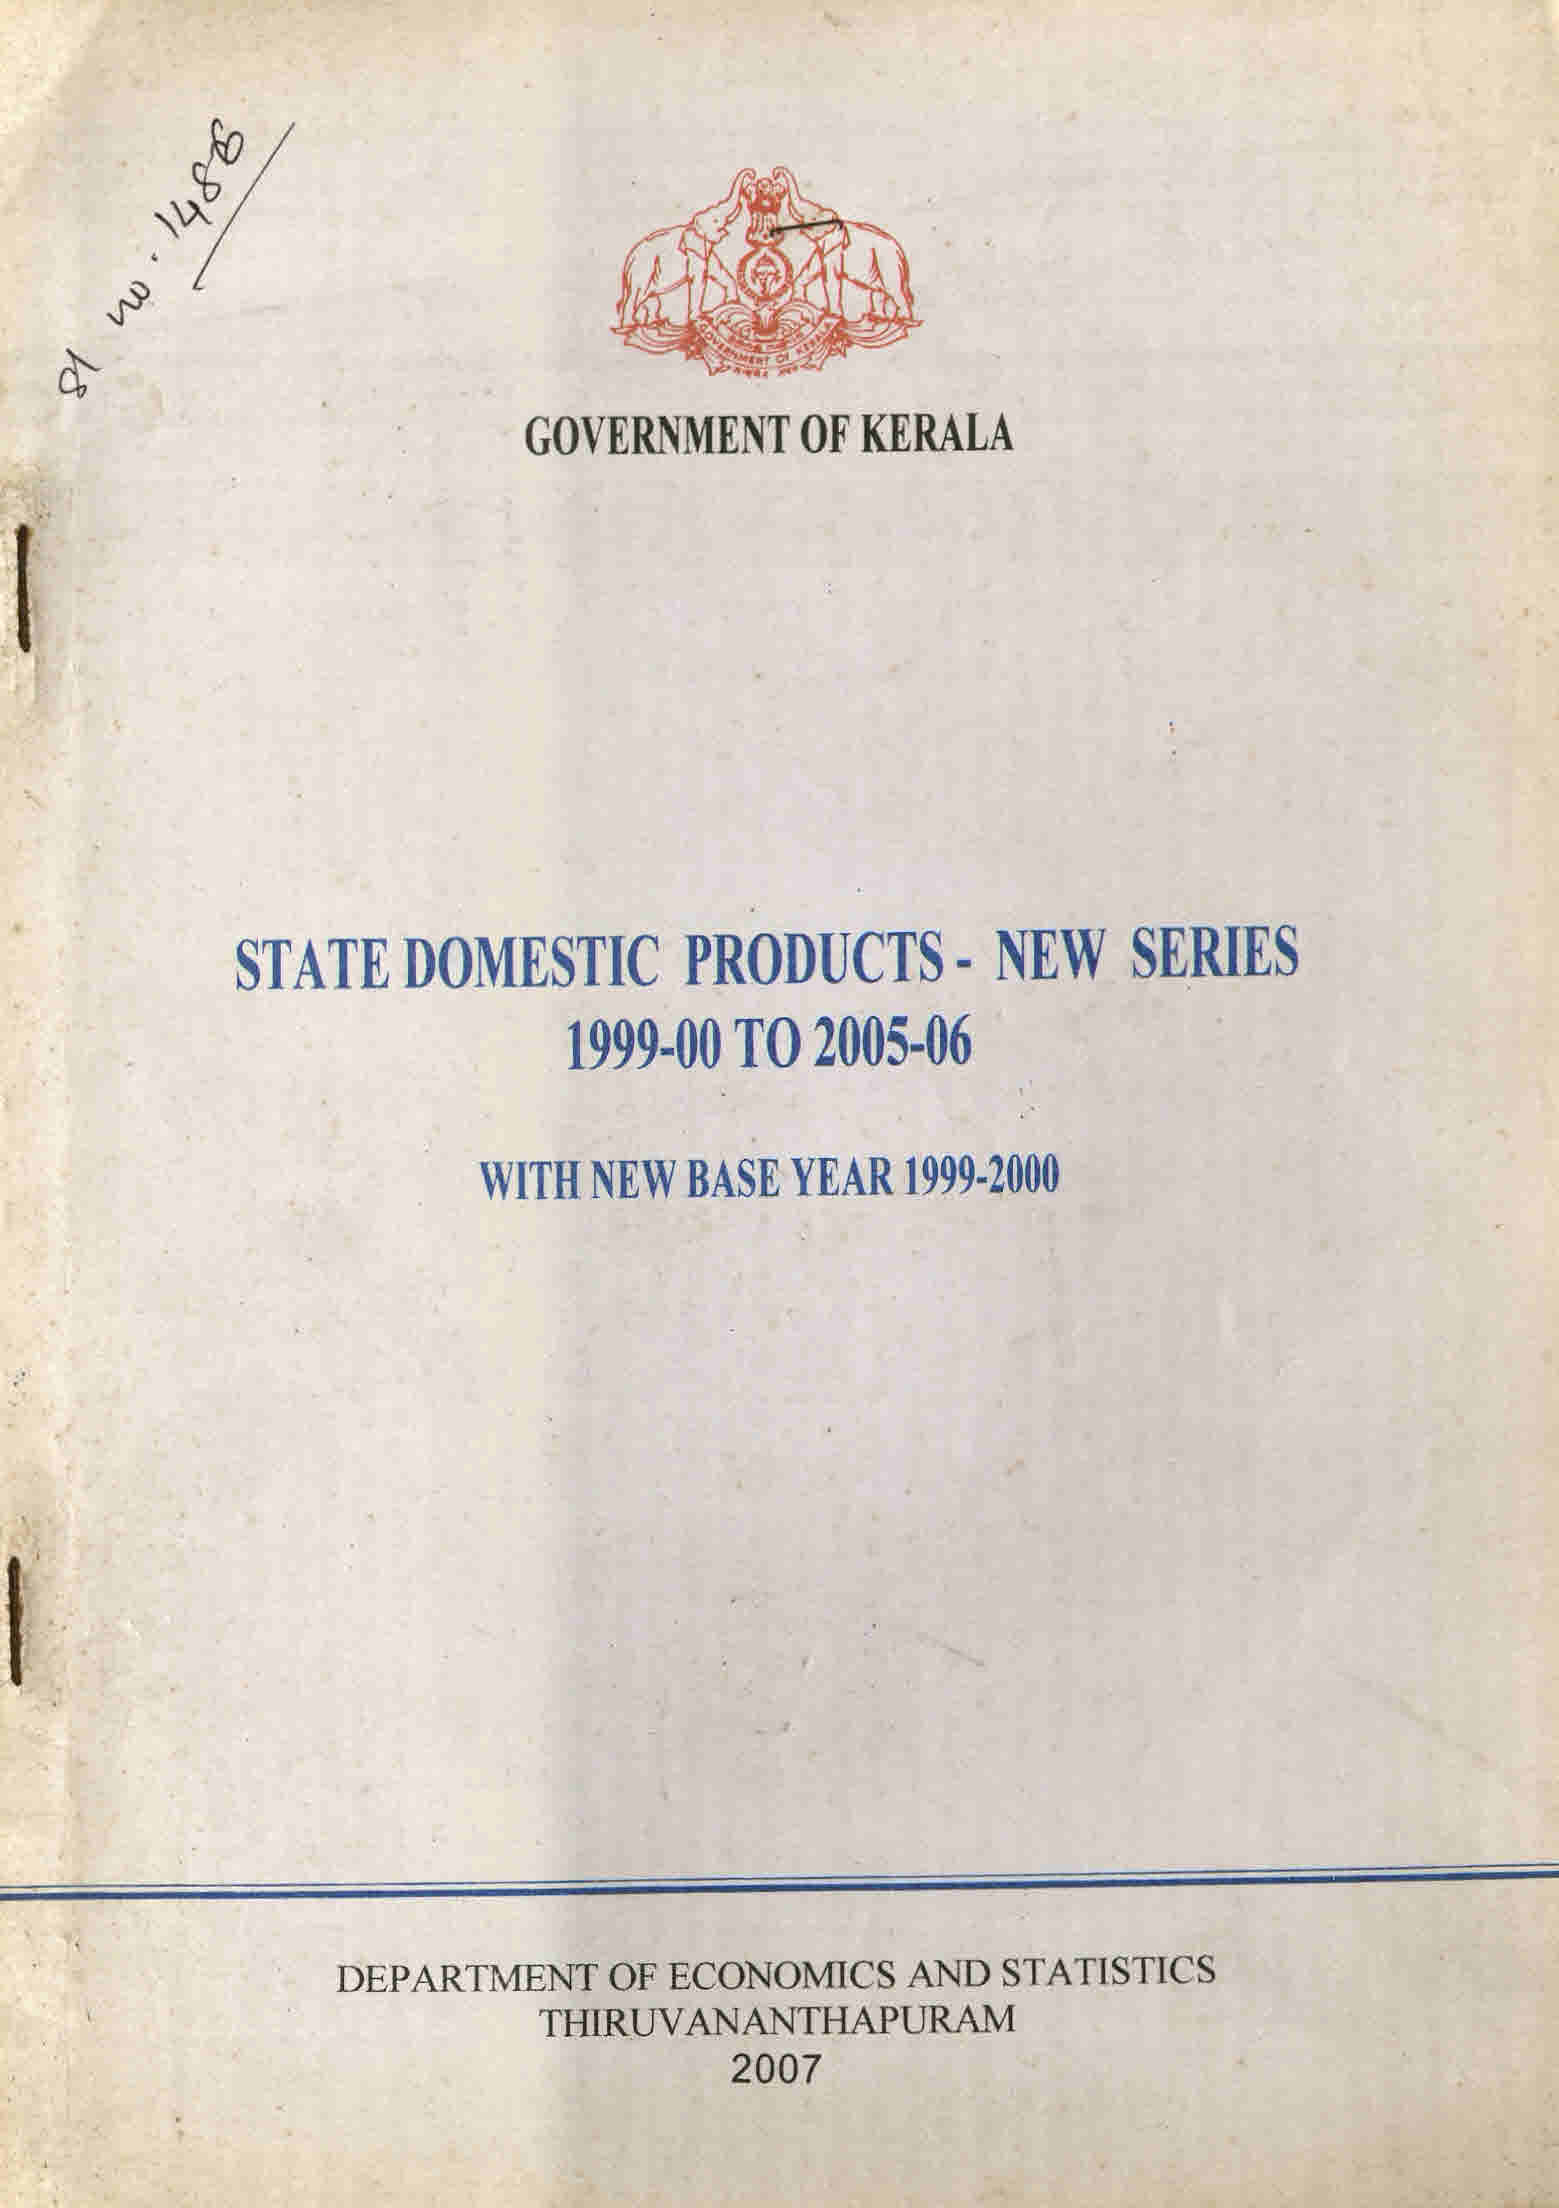 STATE DOMESTIC PRODUCTS - NEW SERIES 1999-00 TO 2005-06